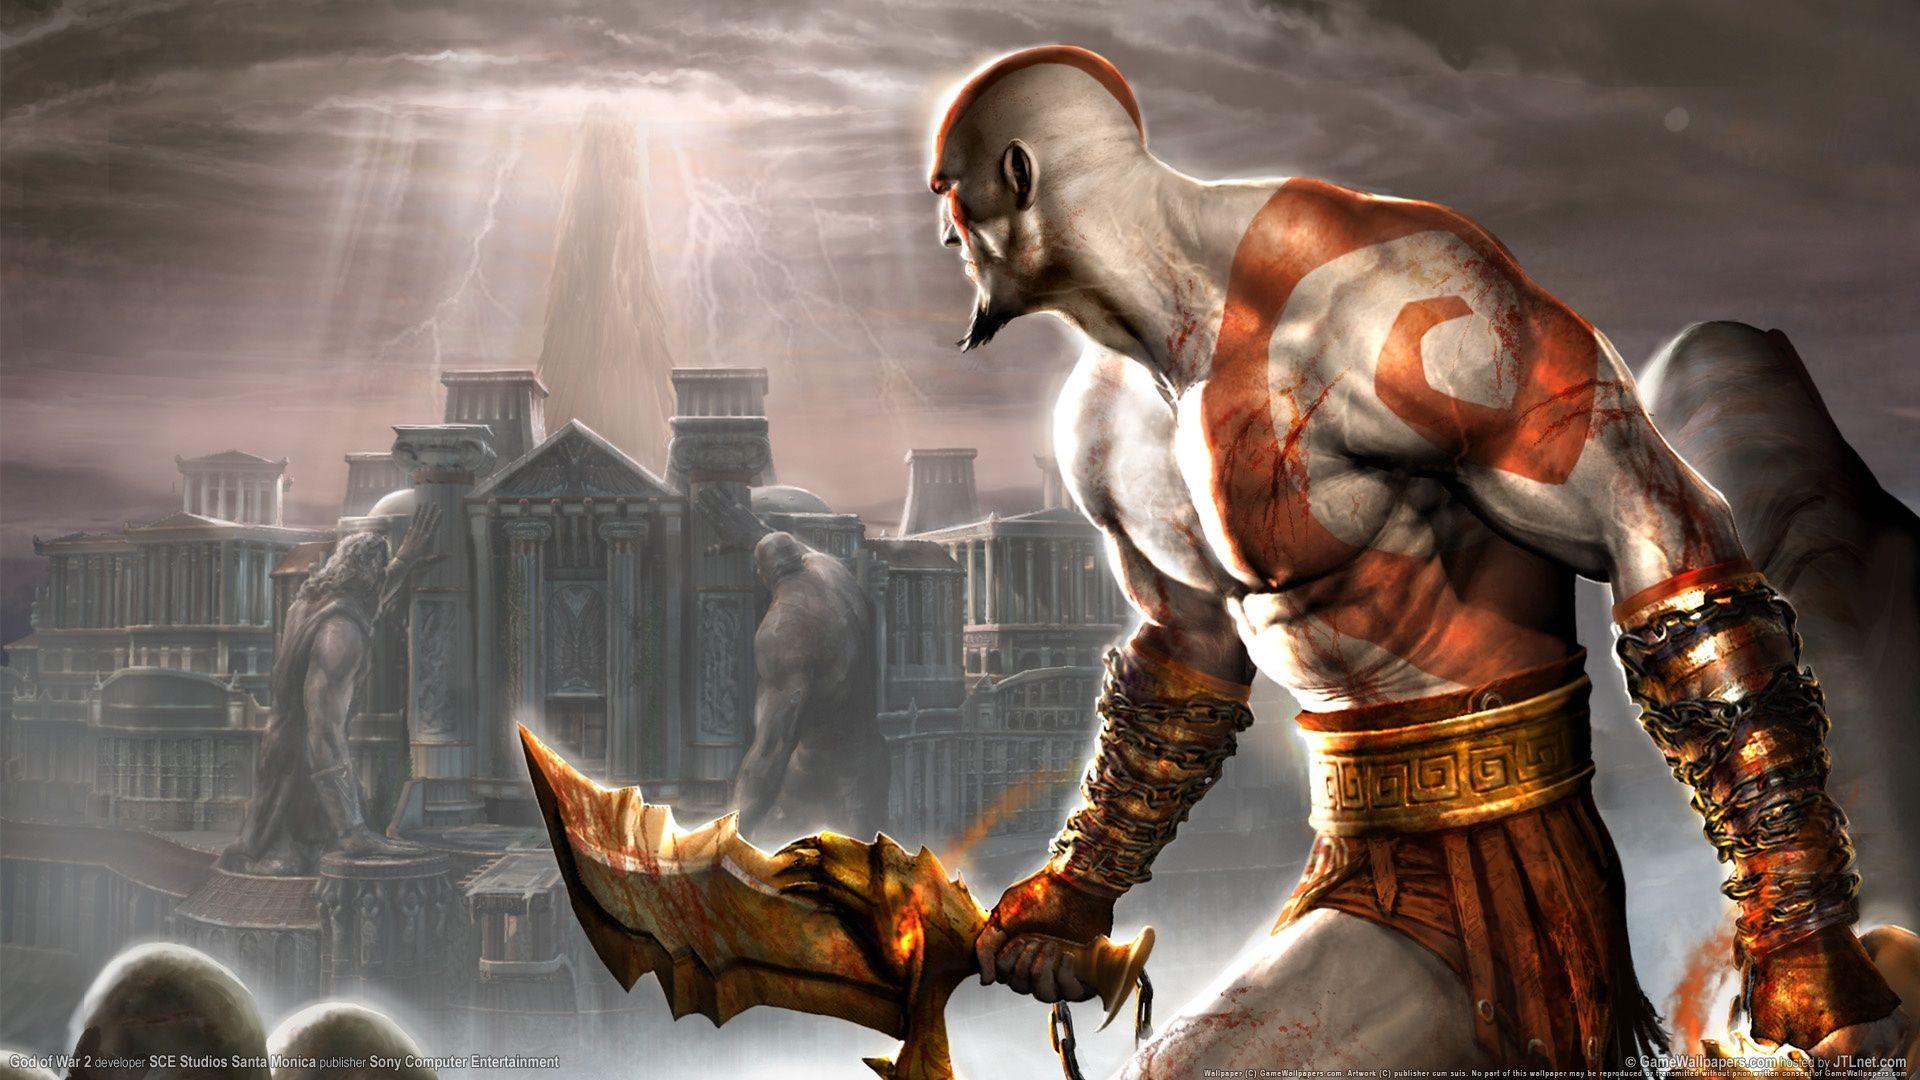 God of War 2 PS2 Game in 1920x1080 Resolution